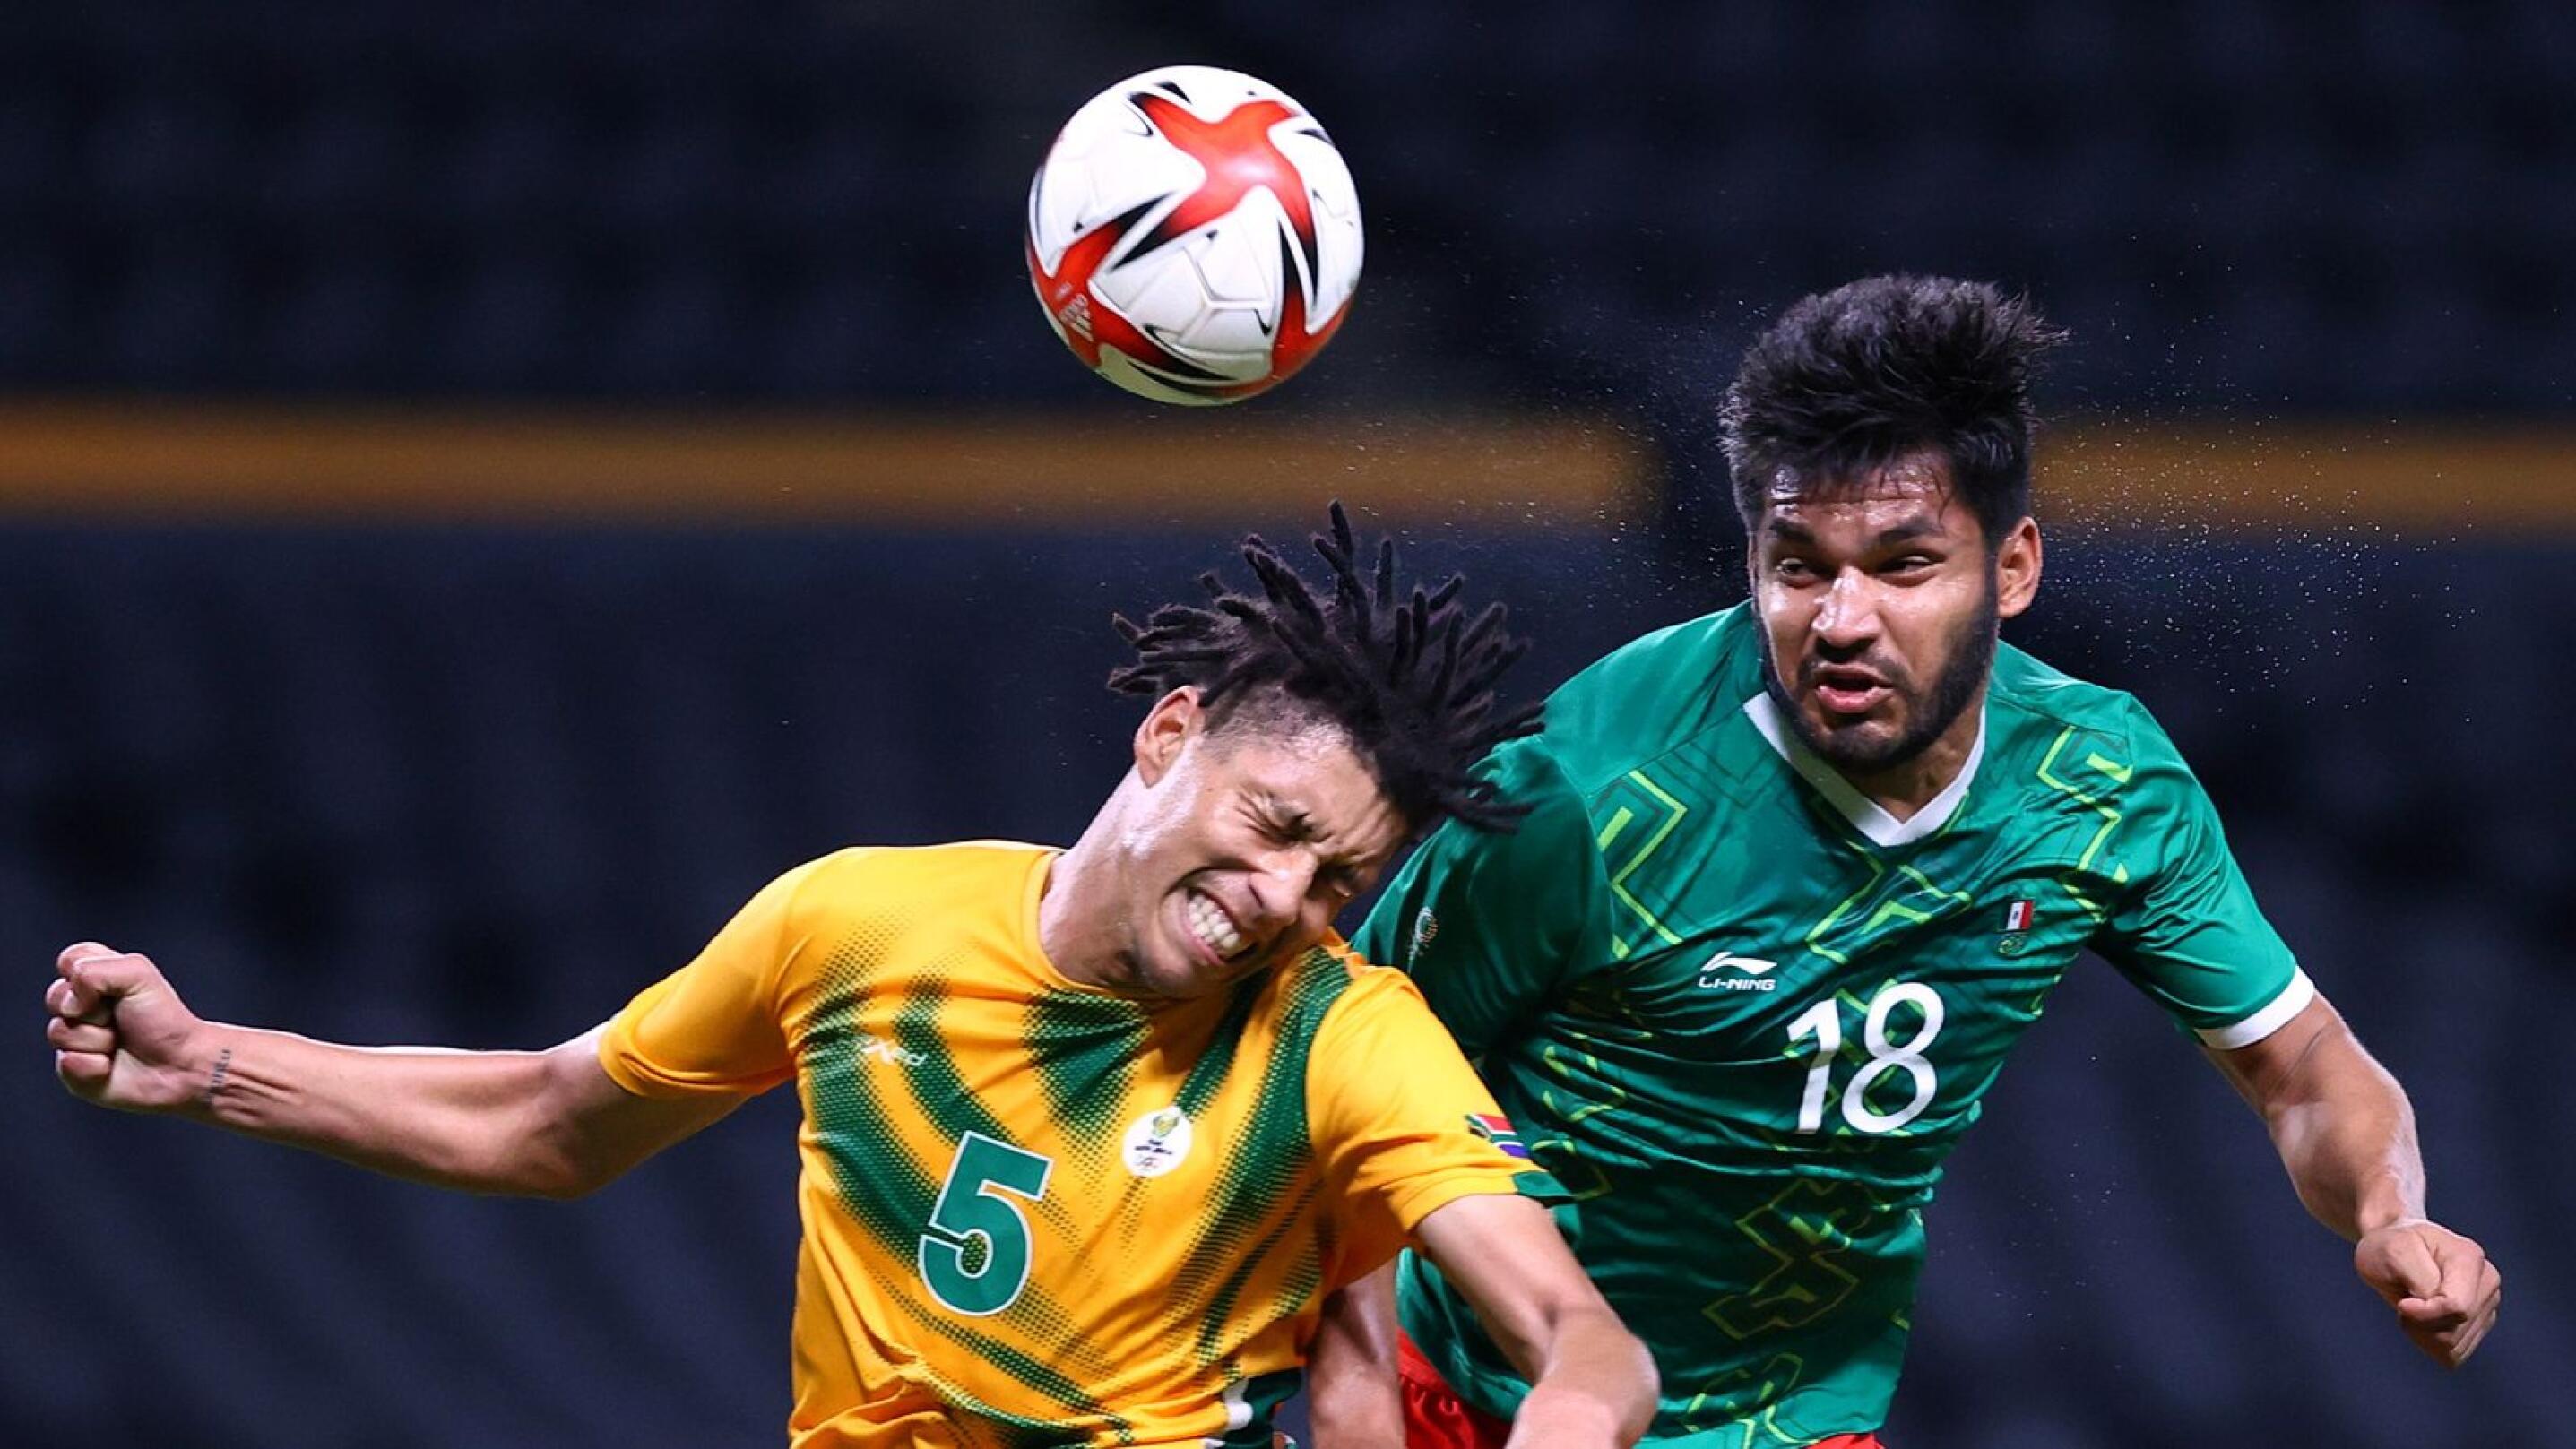 Luke Fleurs of South Africa in action with Eduardo Aguirre of Mexico during their Olympic Group A game on Wedensday